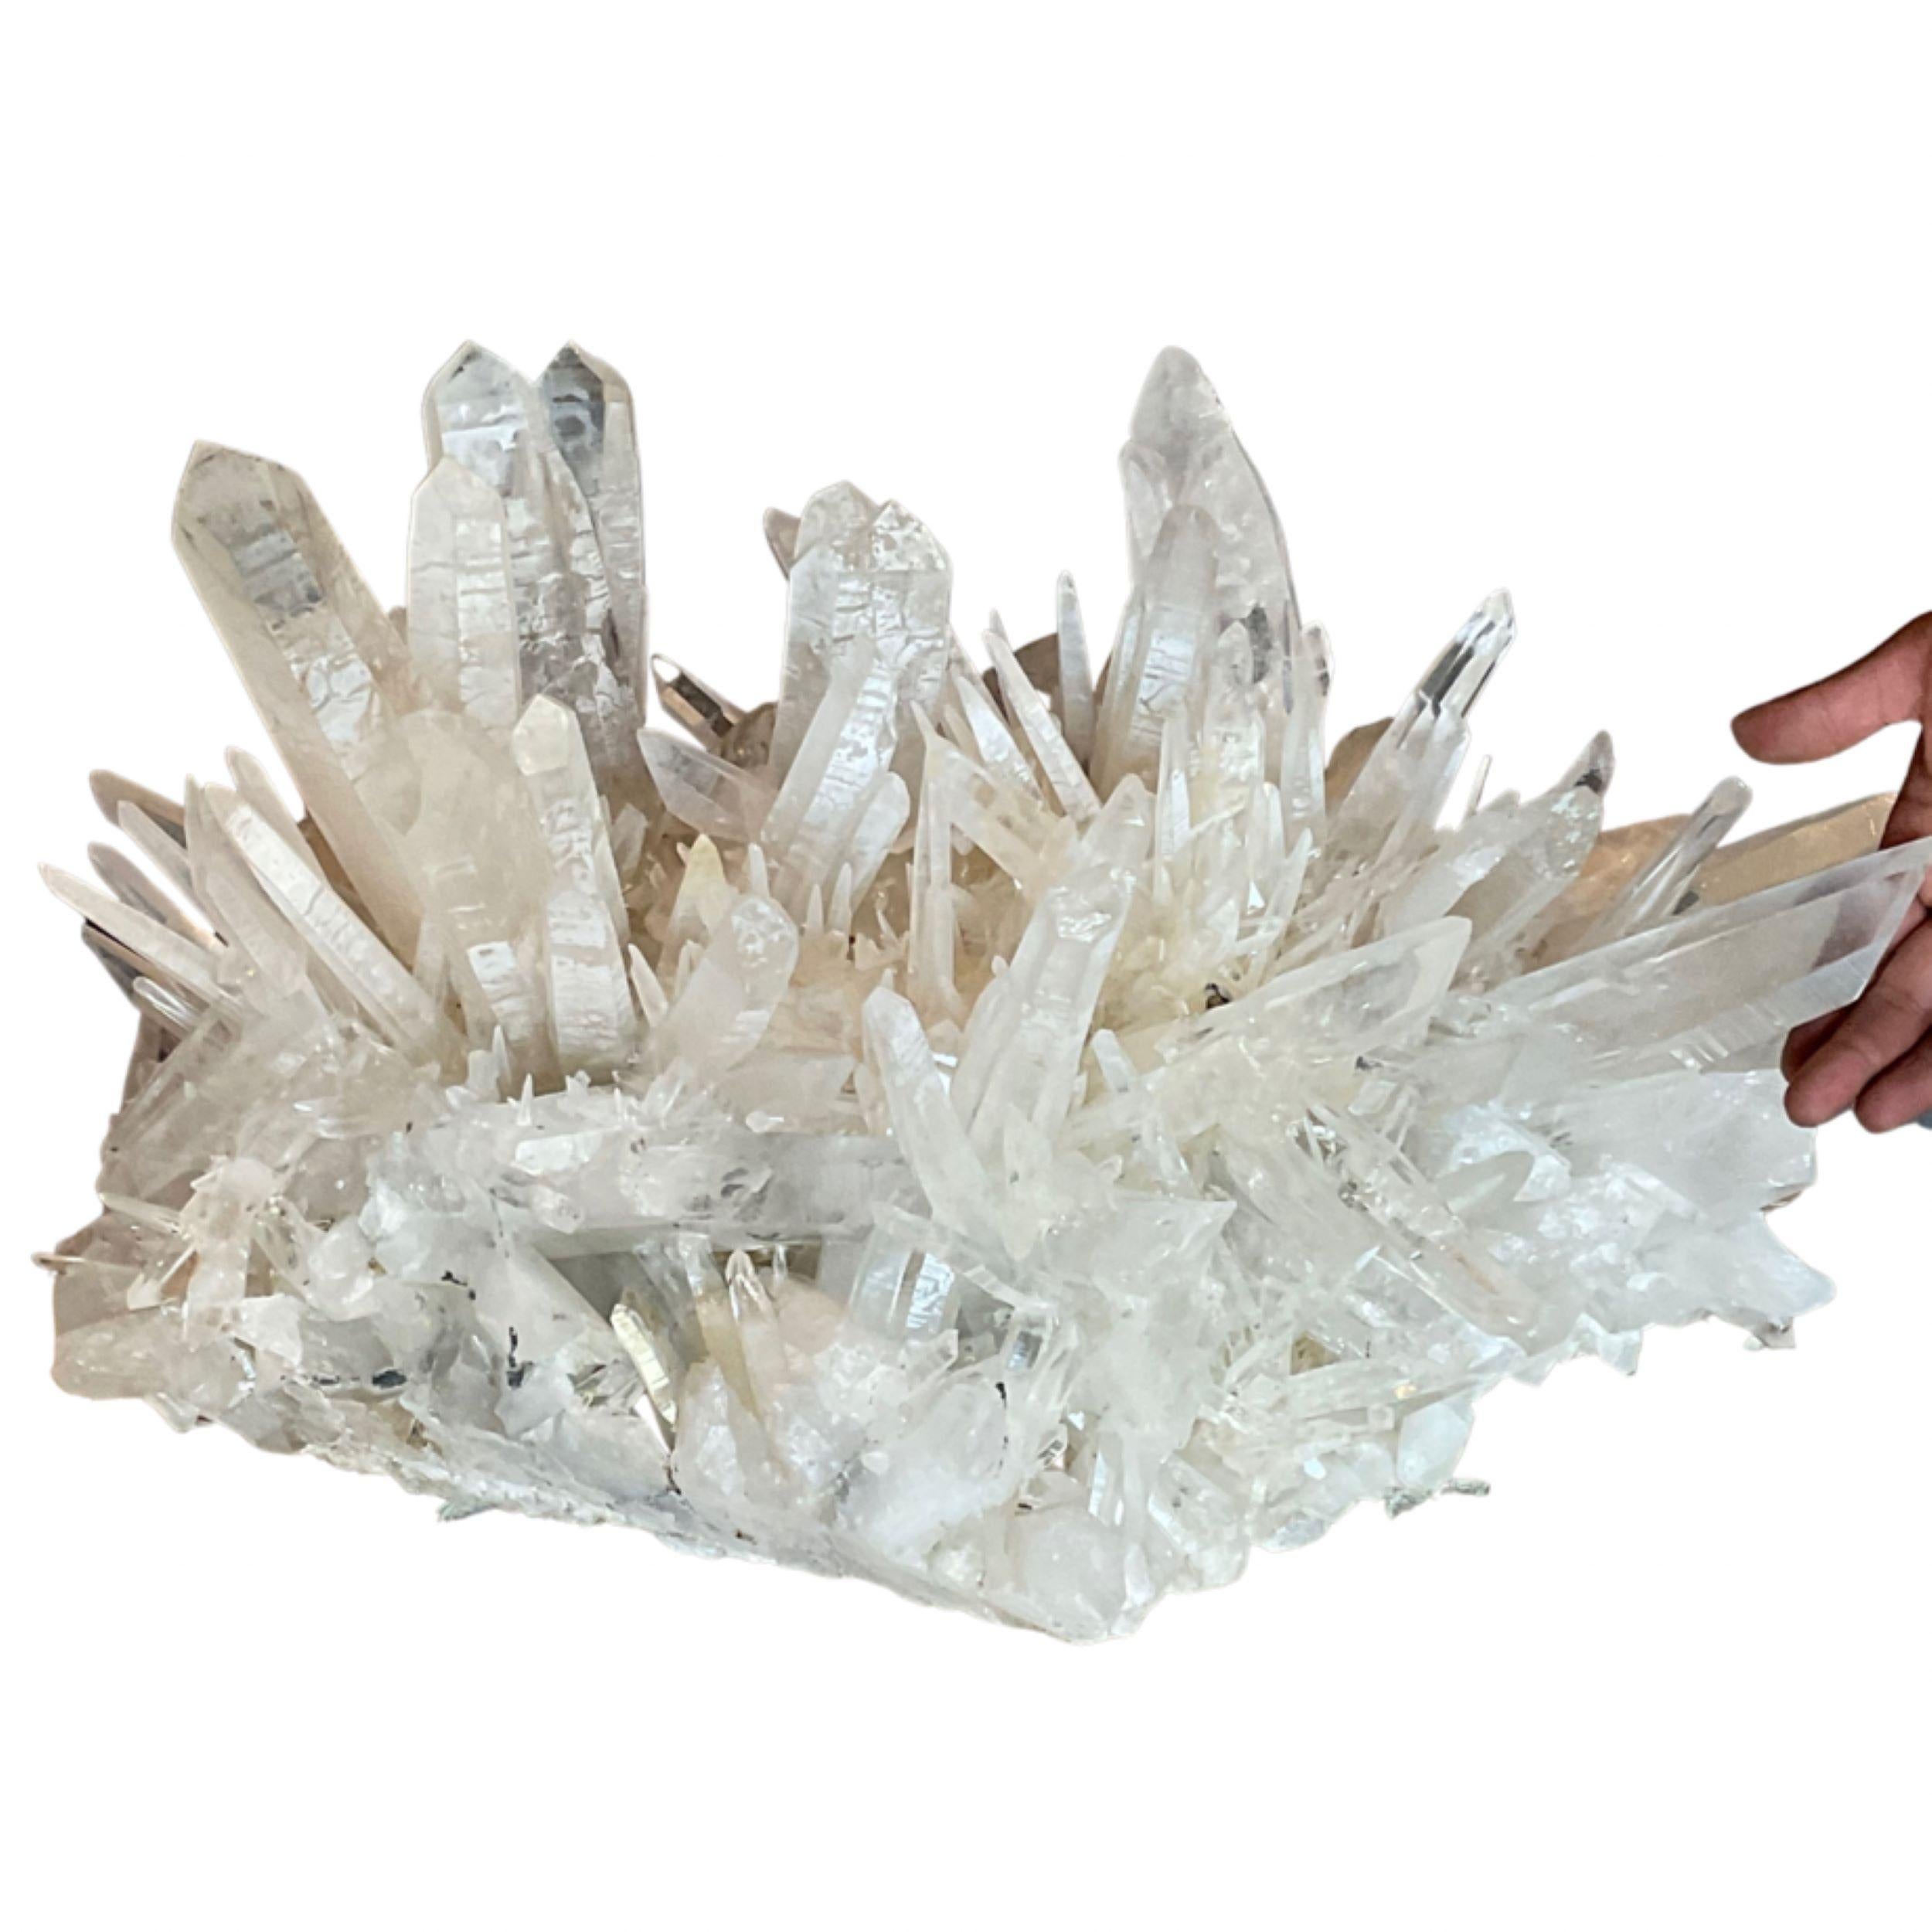 Extra Large Clear Quartz Crystal Generator cluster
Free-Standing
This Piece Can Sit in 2 Different Positions, one more straight up and one slightly leaning forward
Intricate Detail with Generators throughout the Cluster
Weighs in at 90